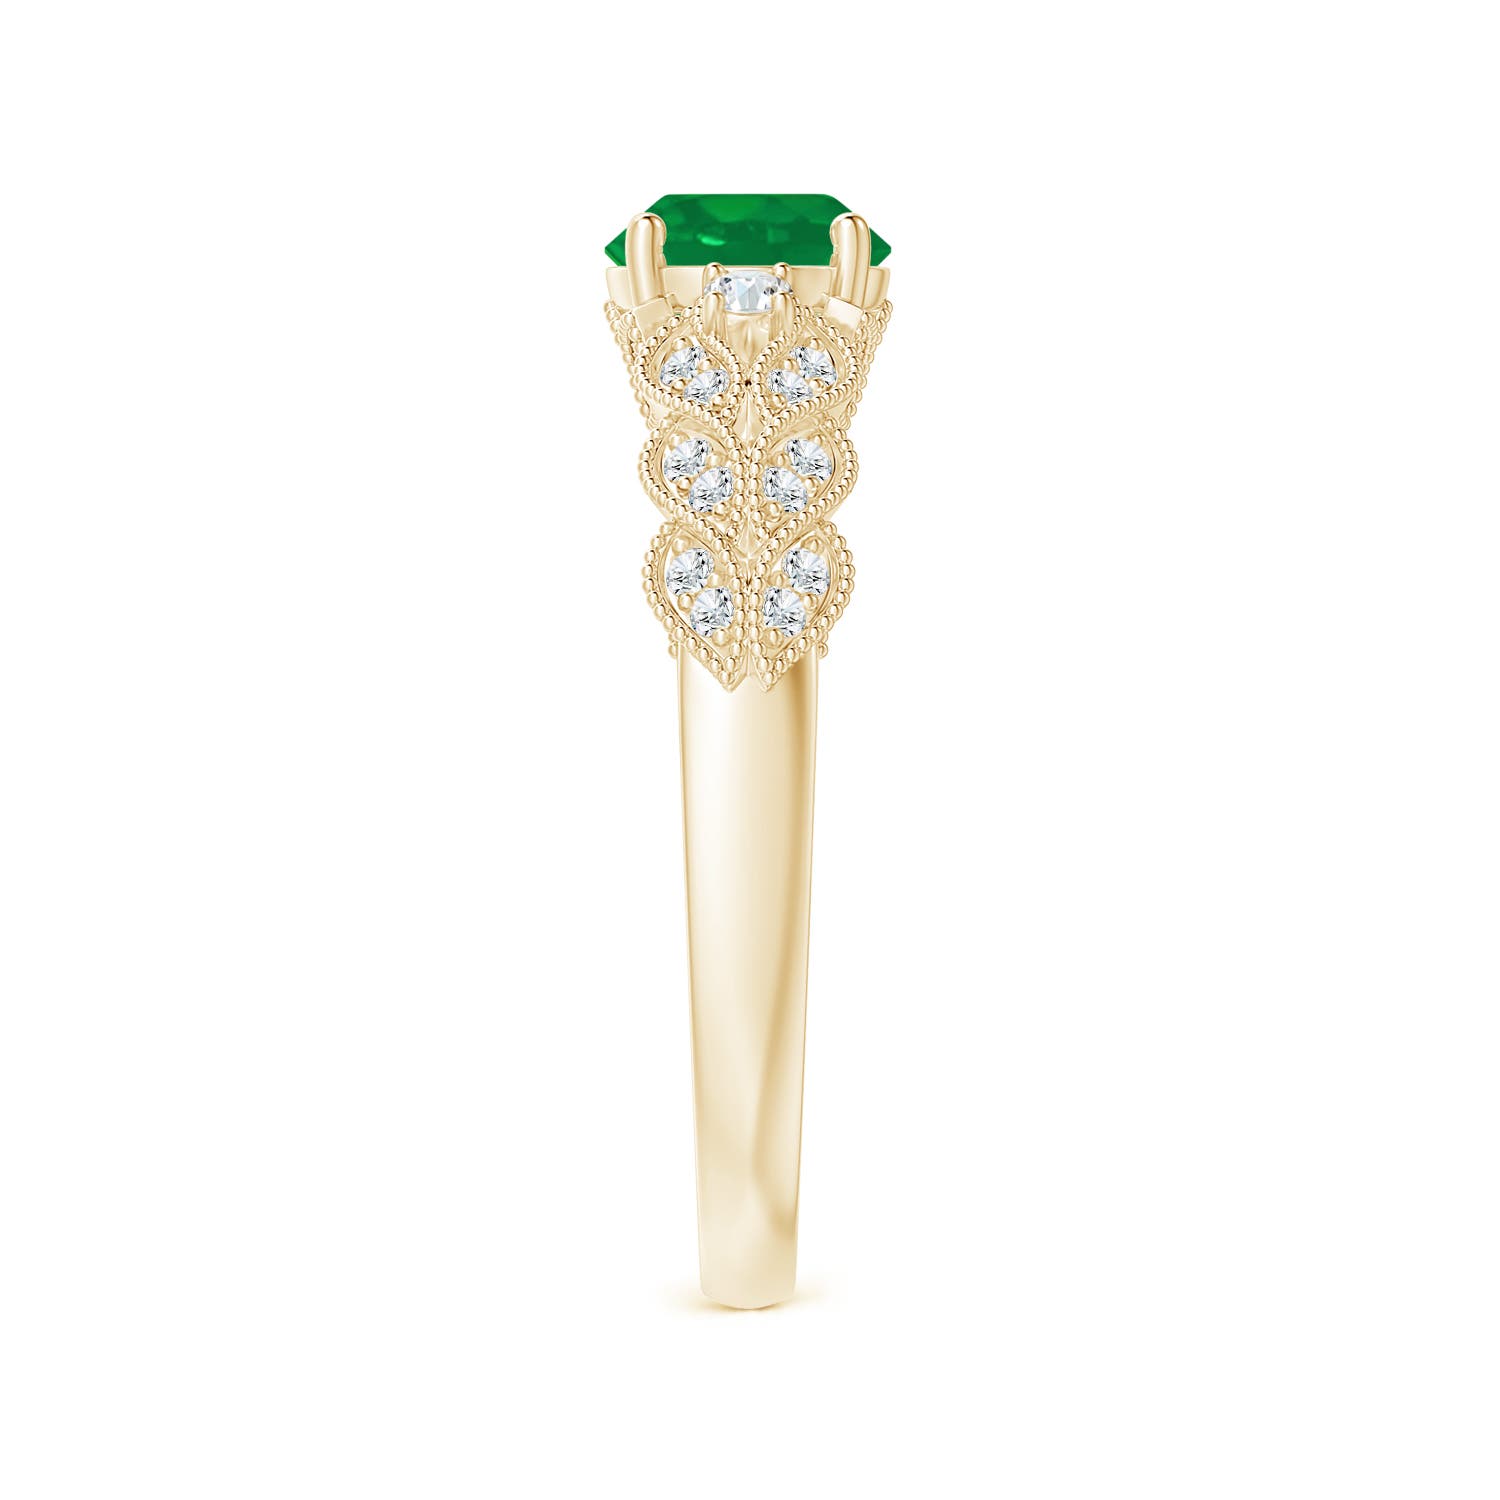 AA - Emerald / 0.94 CT / 14 KT Yellow Gold